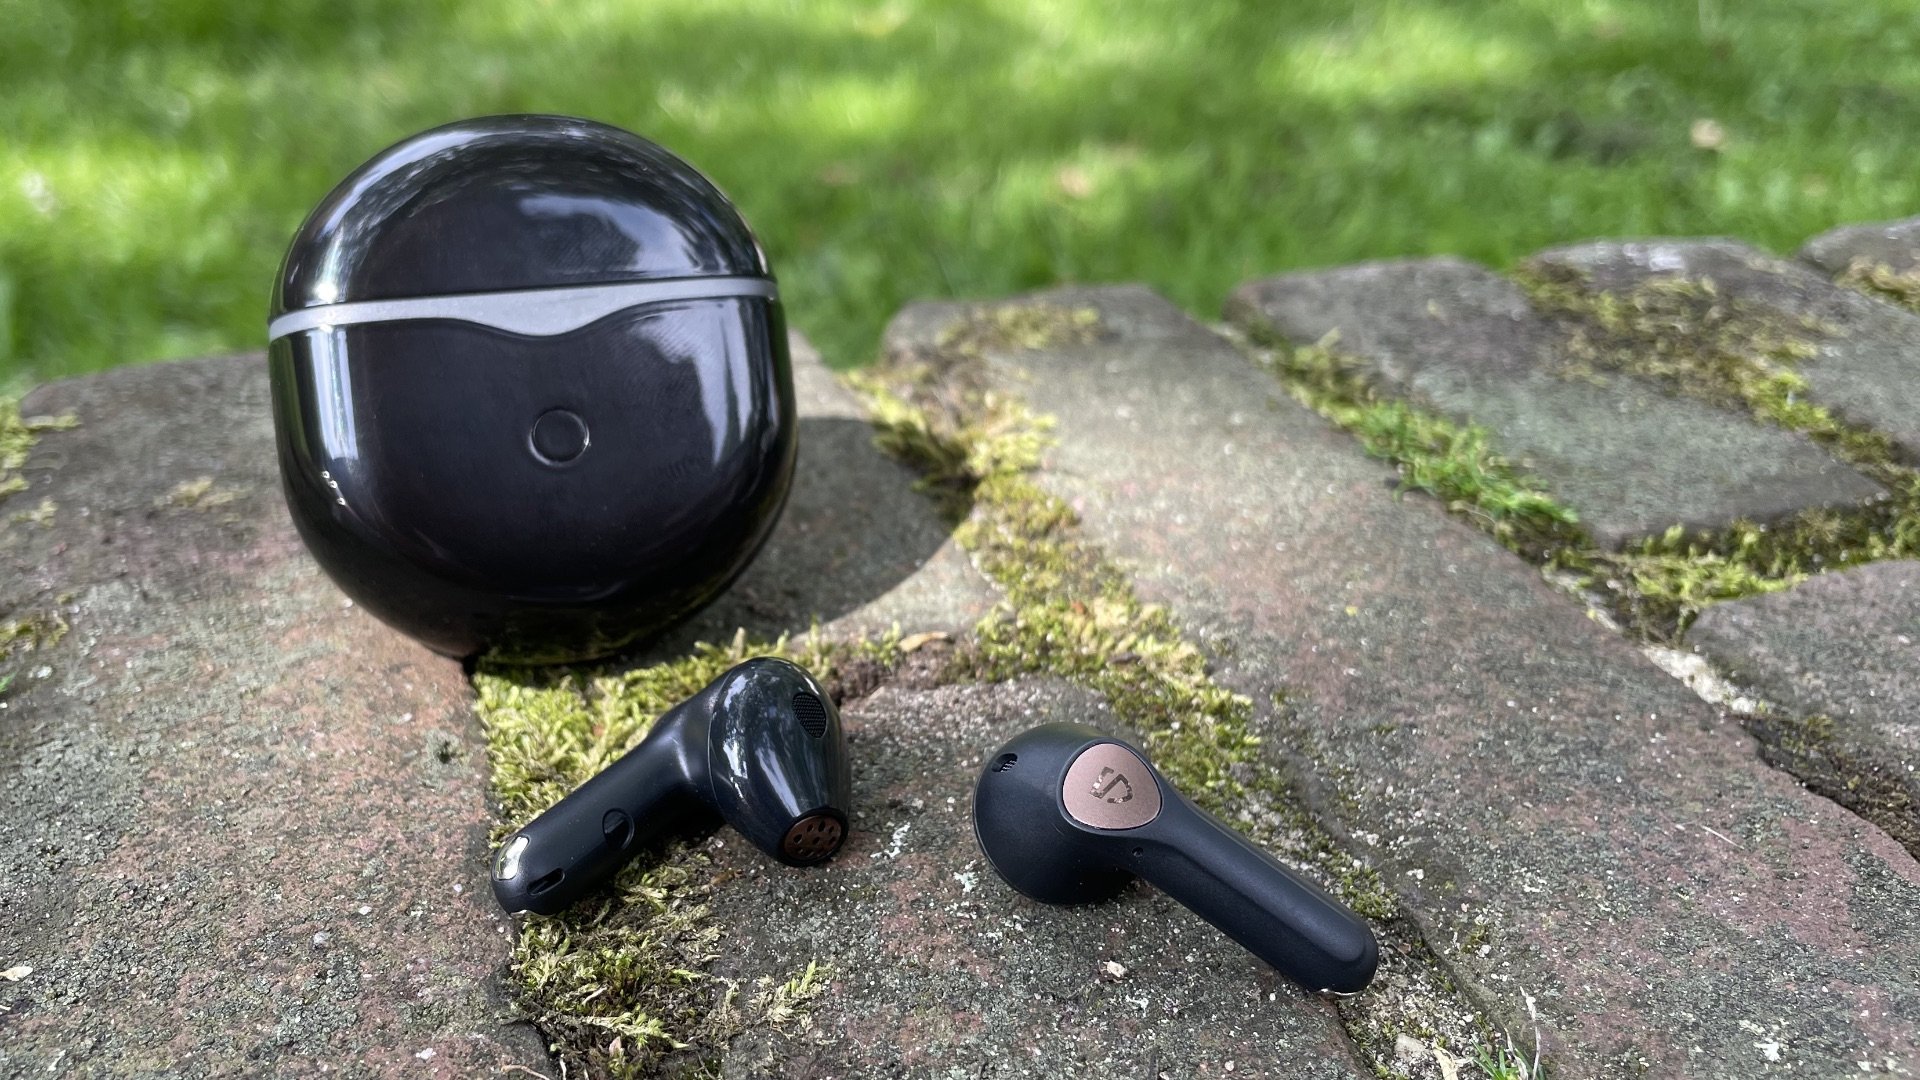 SoundPEATS Air4 vs Air4 Lite review: Which earbuds are better?